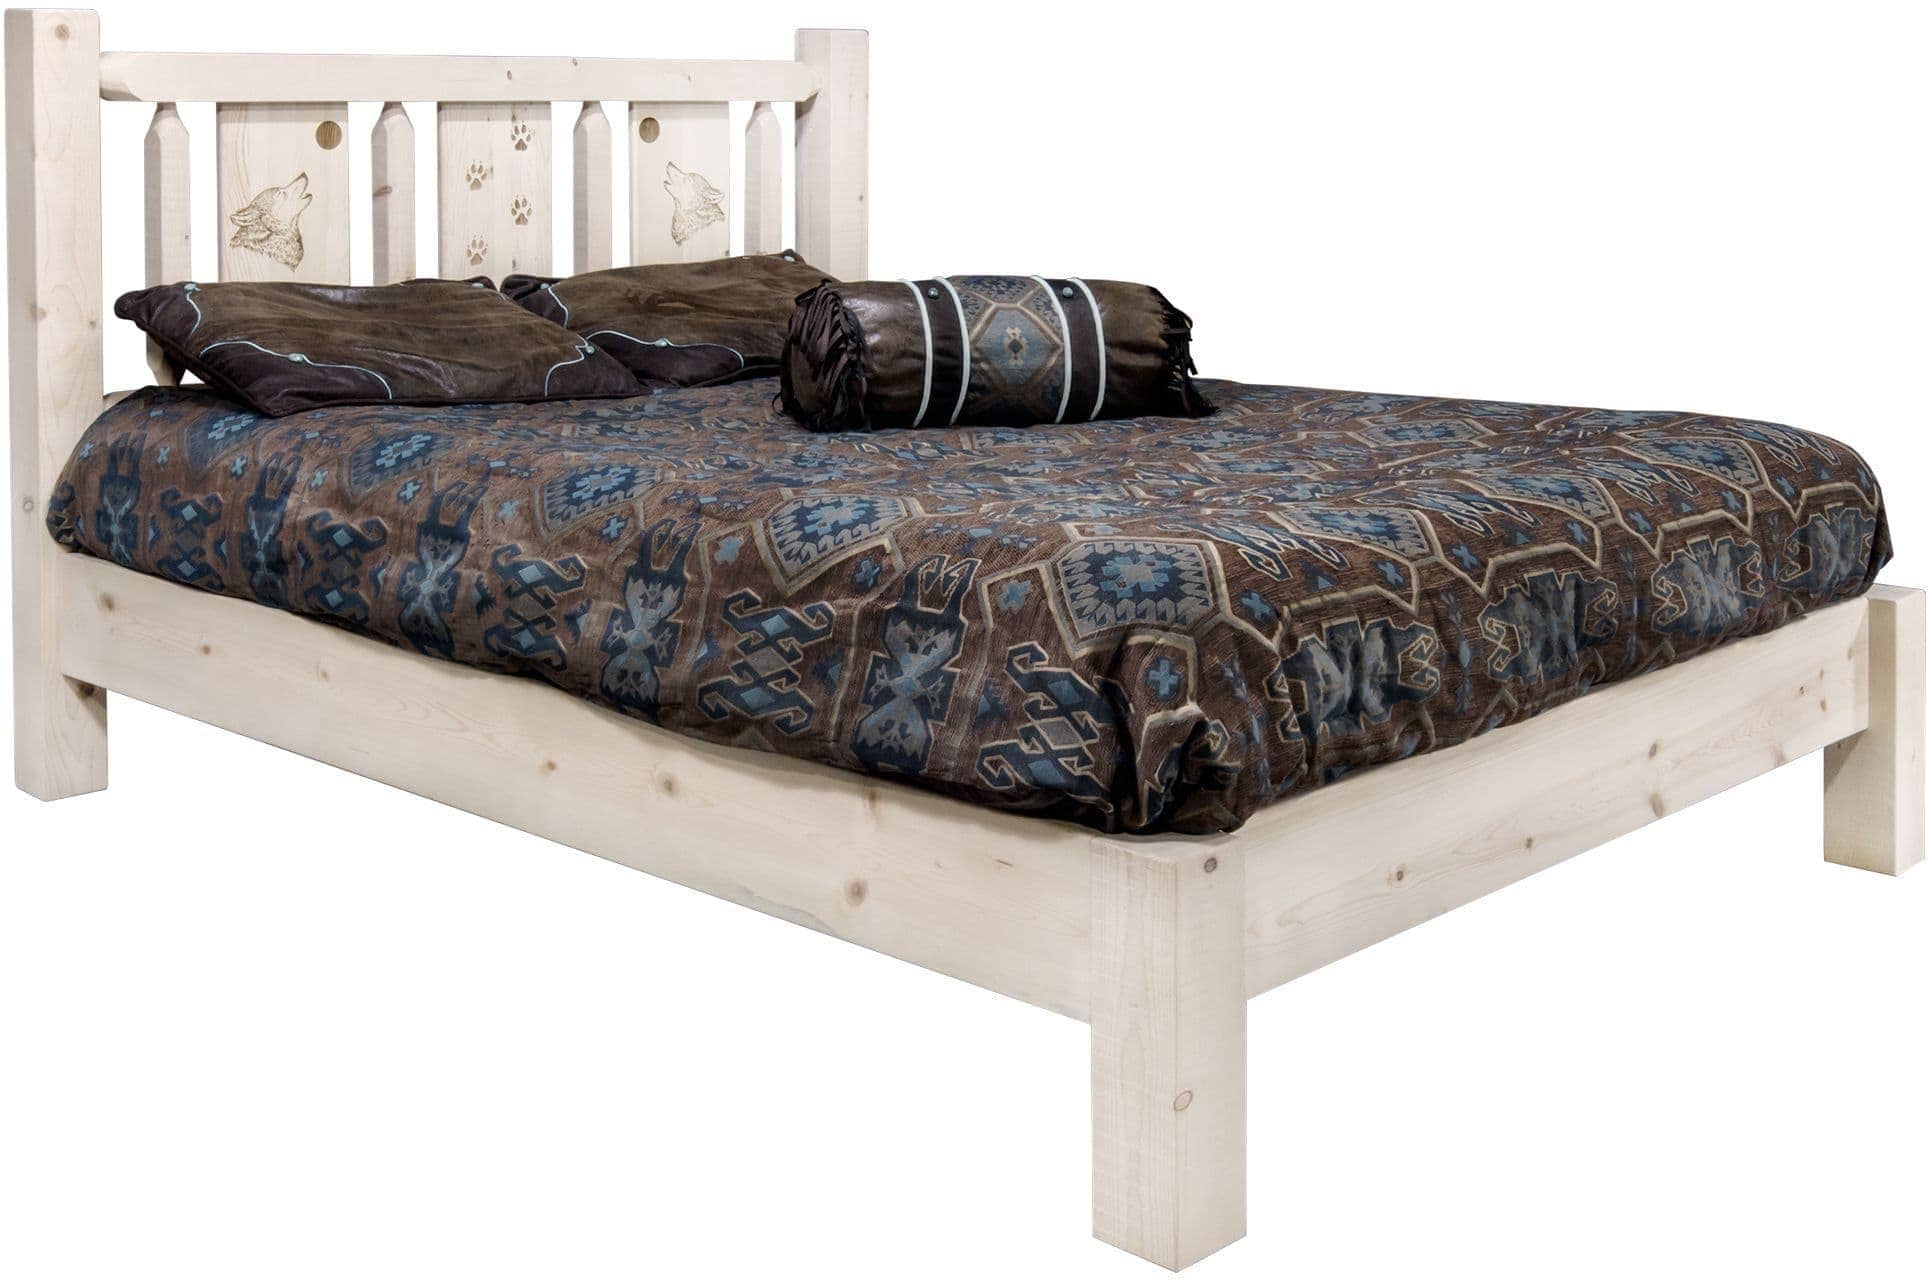 Montana Woodworks Homestead Collection Queen Platform Bed with Laser Engraved Design - Clear Lacquer Finish-Rustic Furniture Marketplace